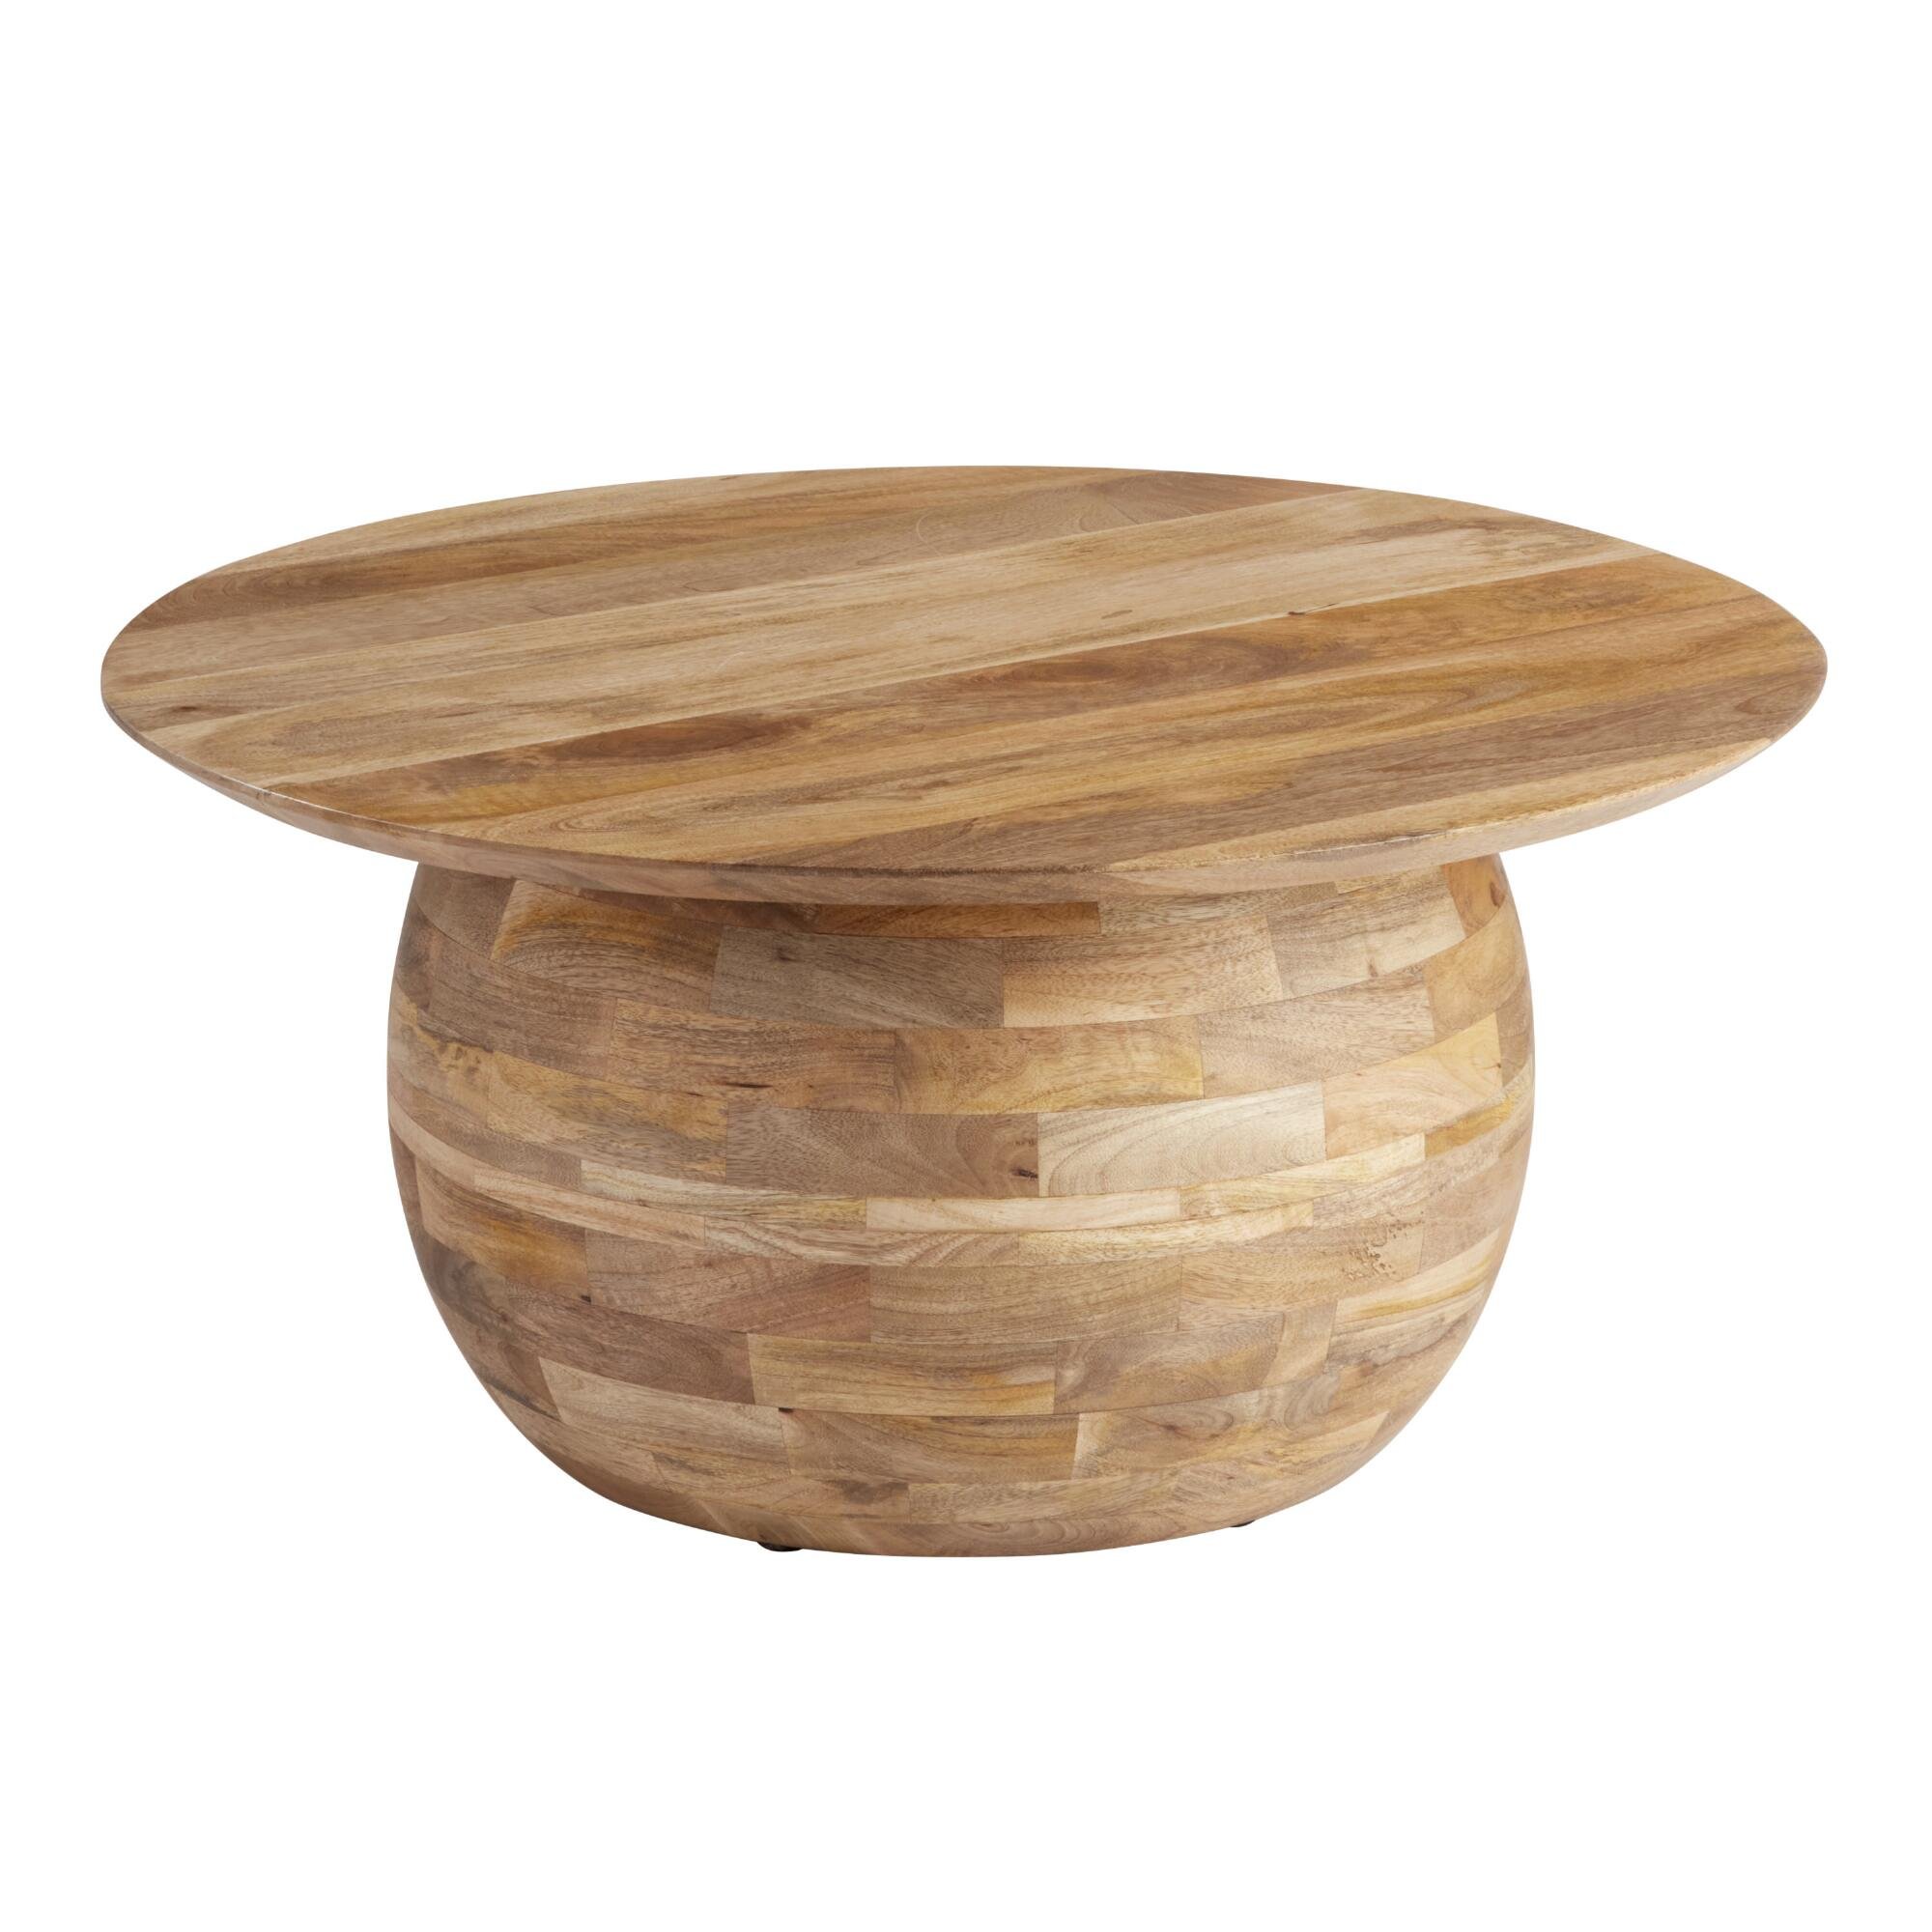 Round Driftwood Wood Ball Gregor Coffee Table - World Market - $399.99